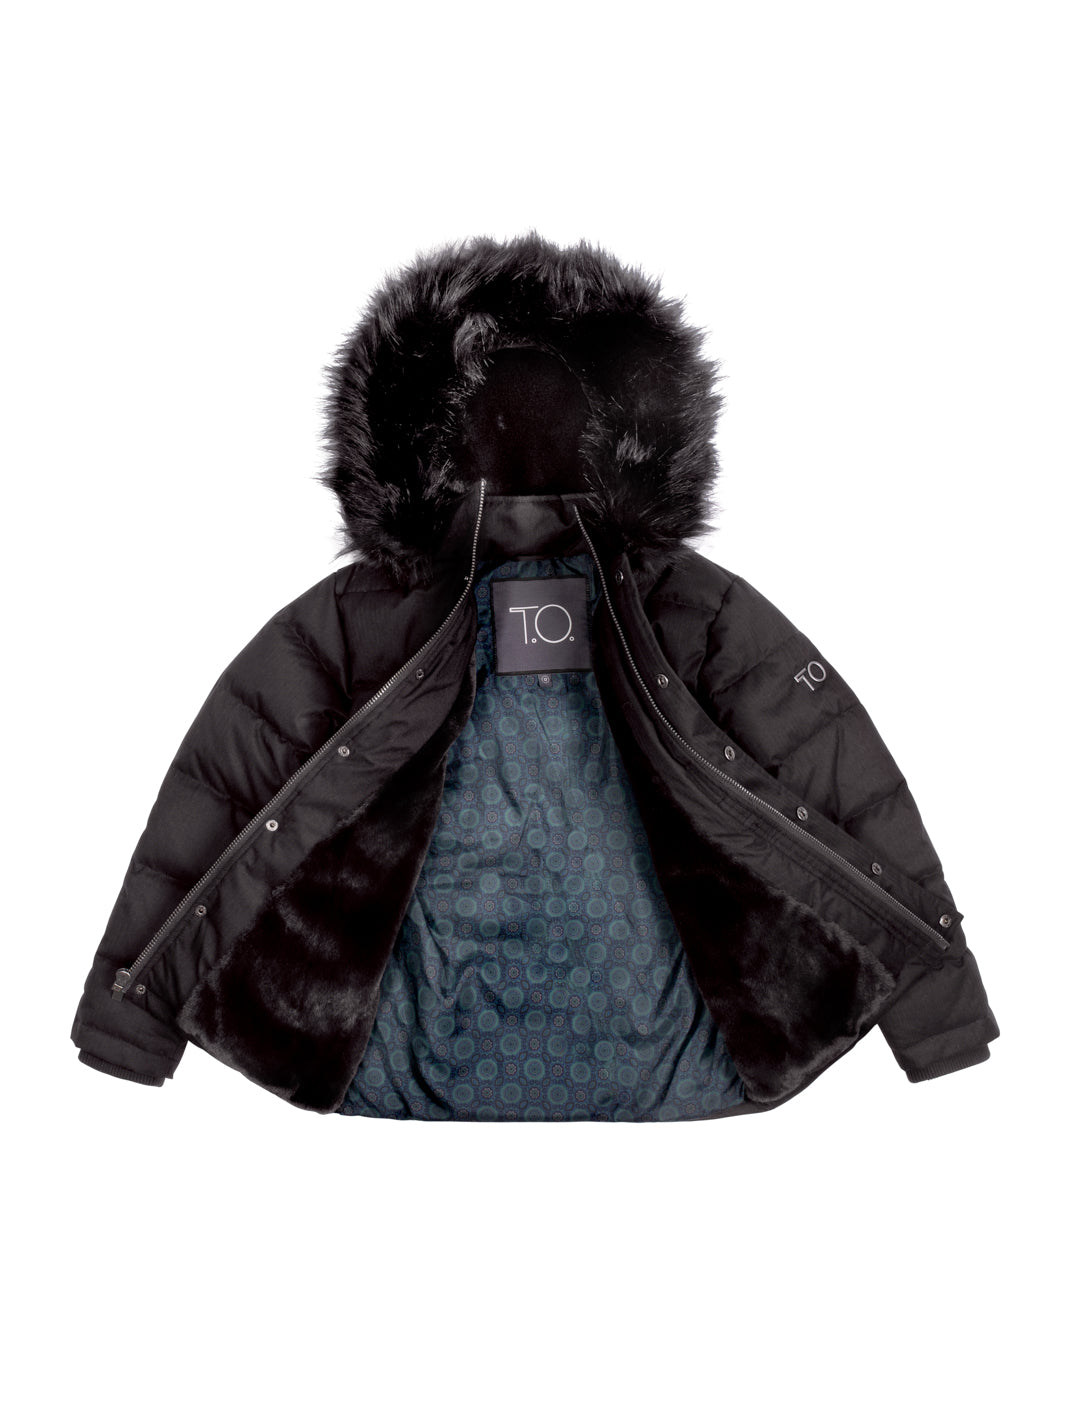 Boy's T.O. Collection Puffer Coat - Black